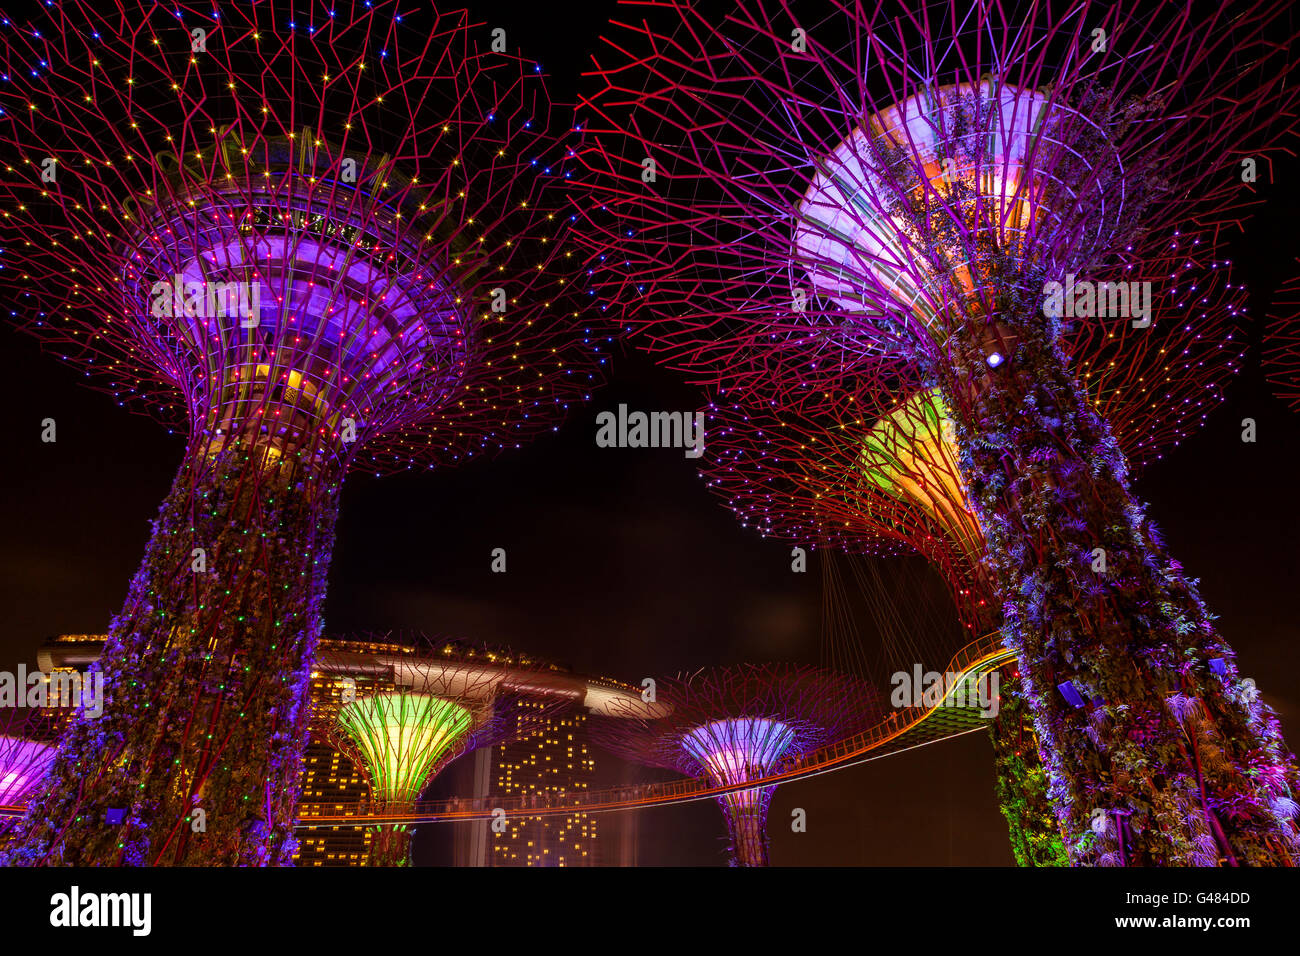 Singapore, Singapore - December 9, 2014: The Supertree Grove comes alive at Gardens by the Bay in Singapore. The nightly dazzlin Stock Photo